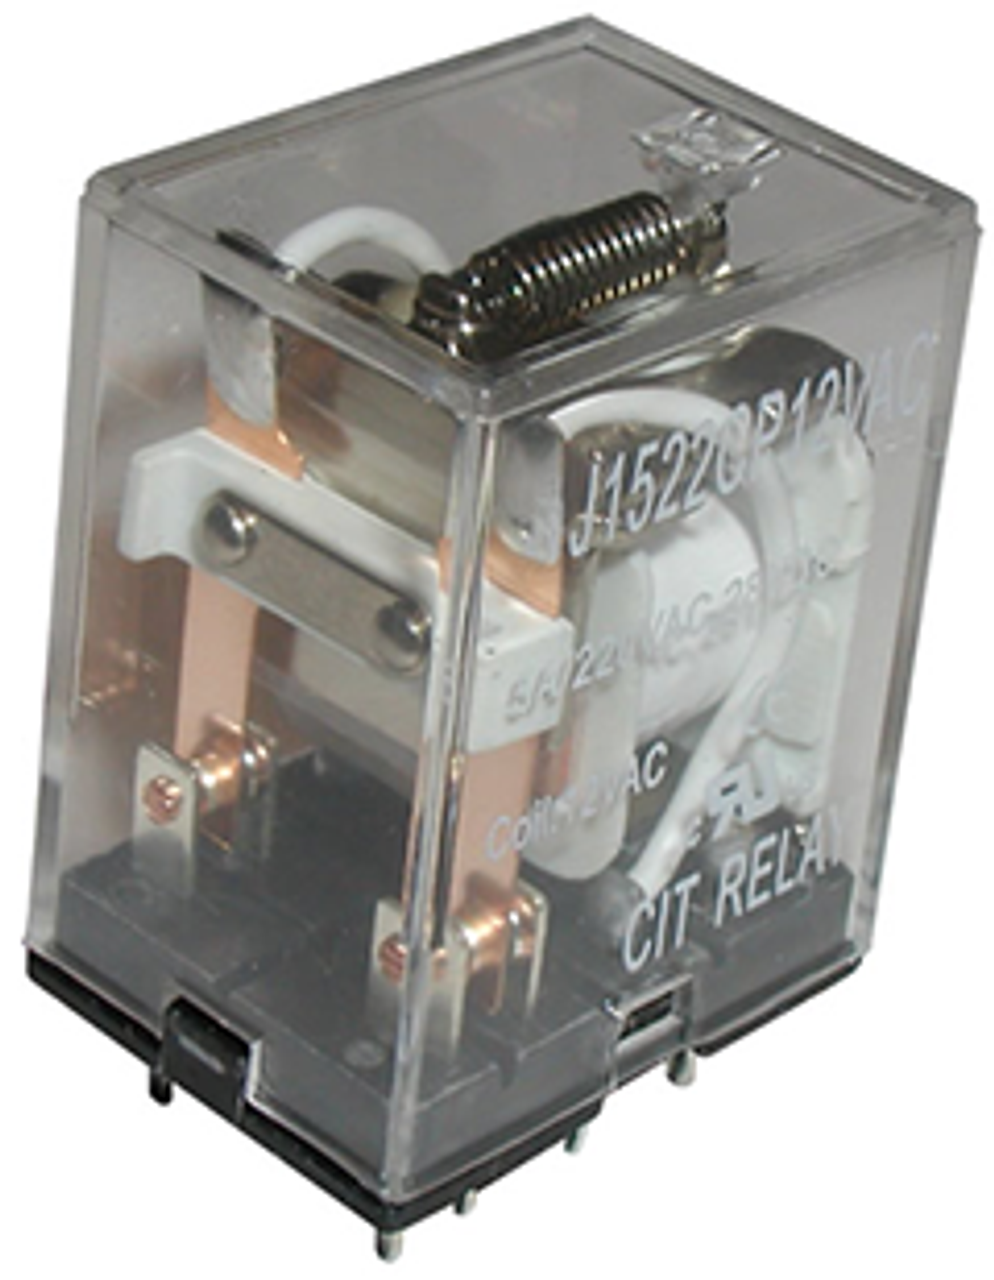 CIT Relay and Switch J1523CP12VAC Industrial Relays